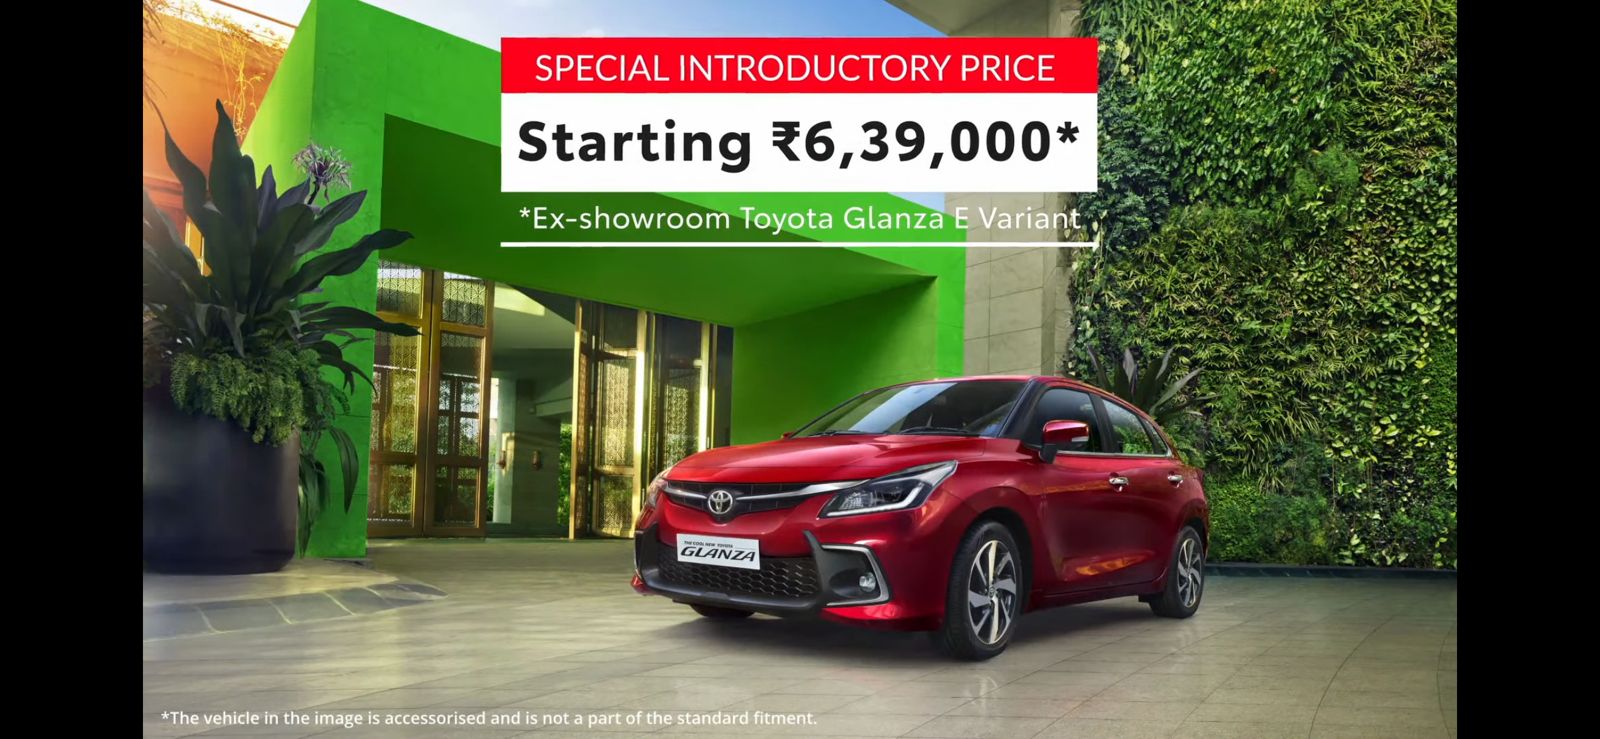 <p>The all-new Toyota Glanza comes with an introductory price of Rs 6.39 lakh</p>